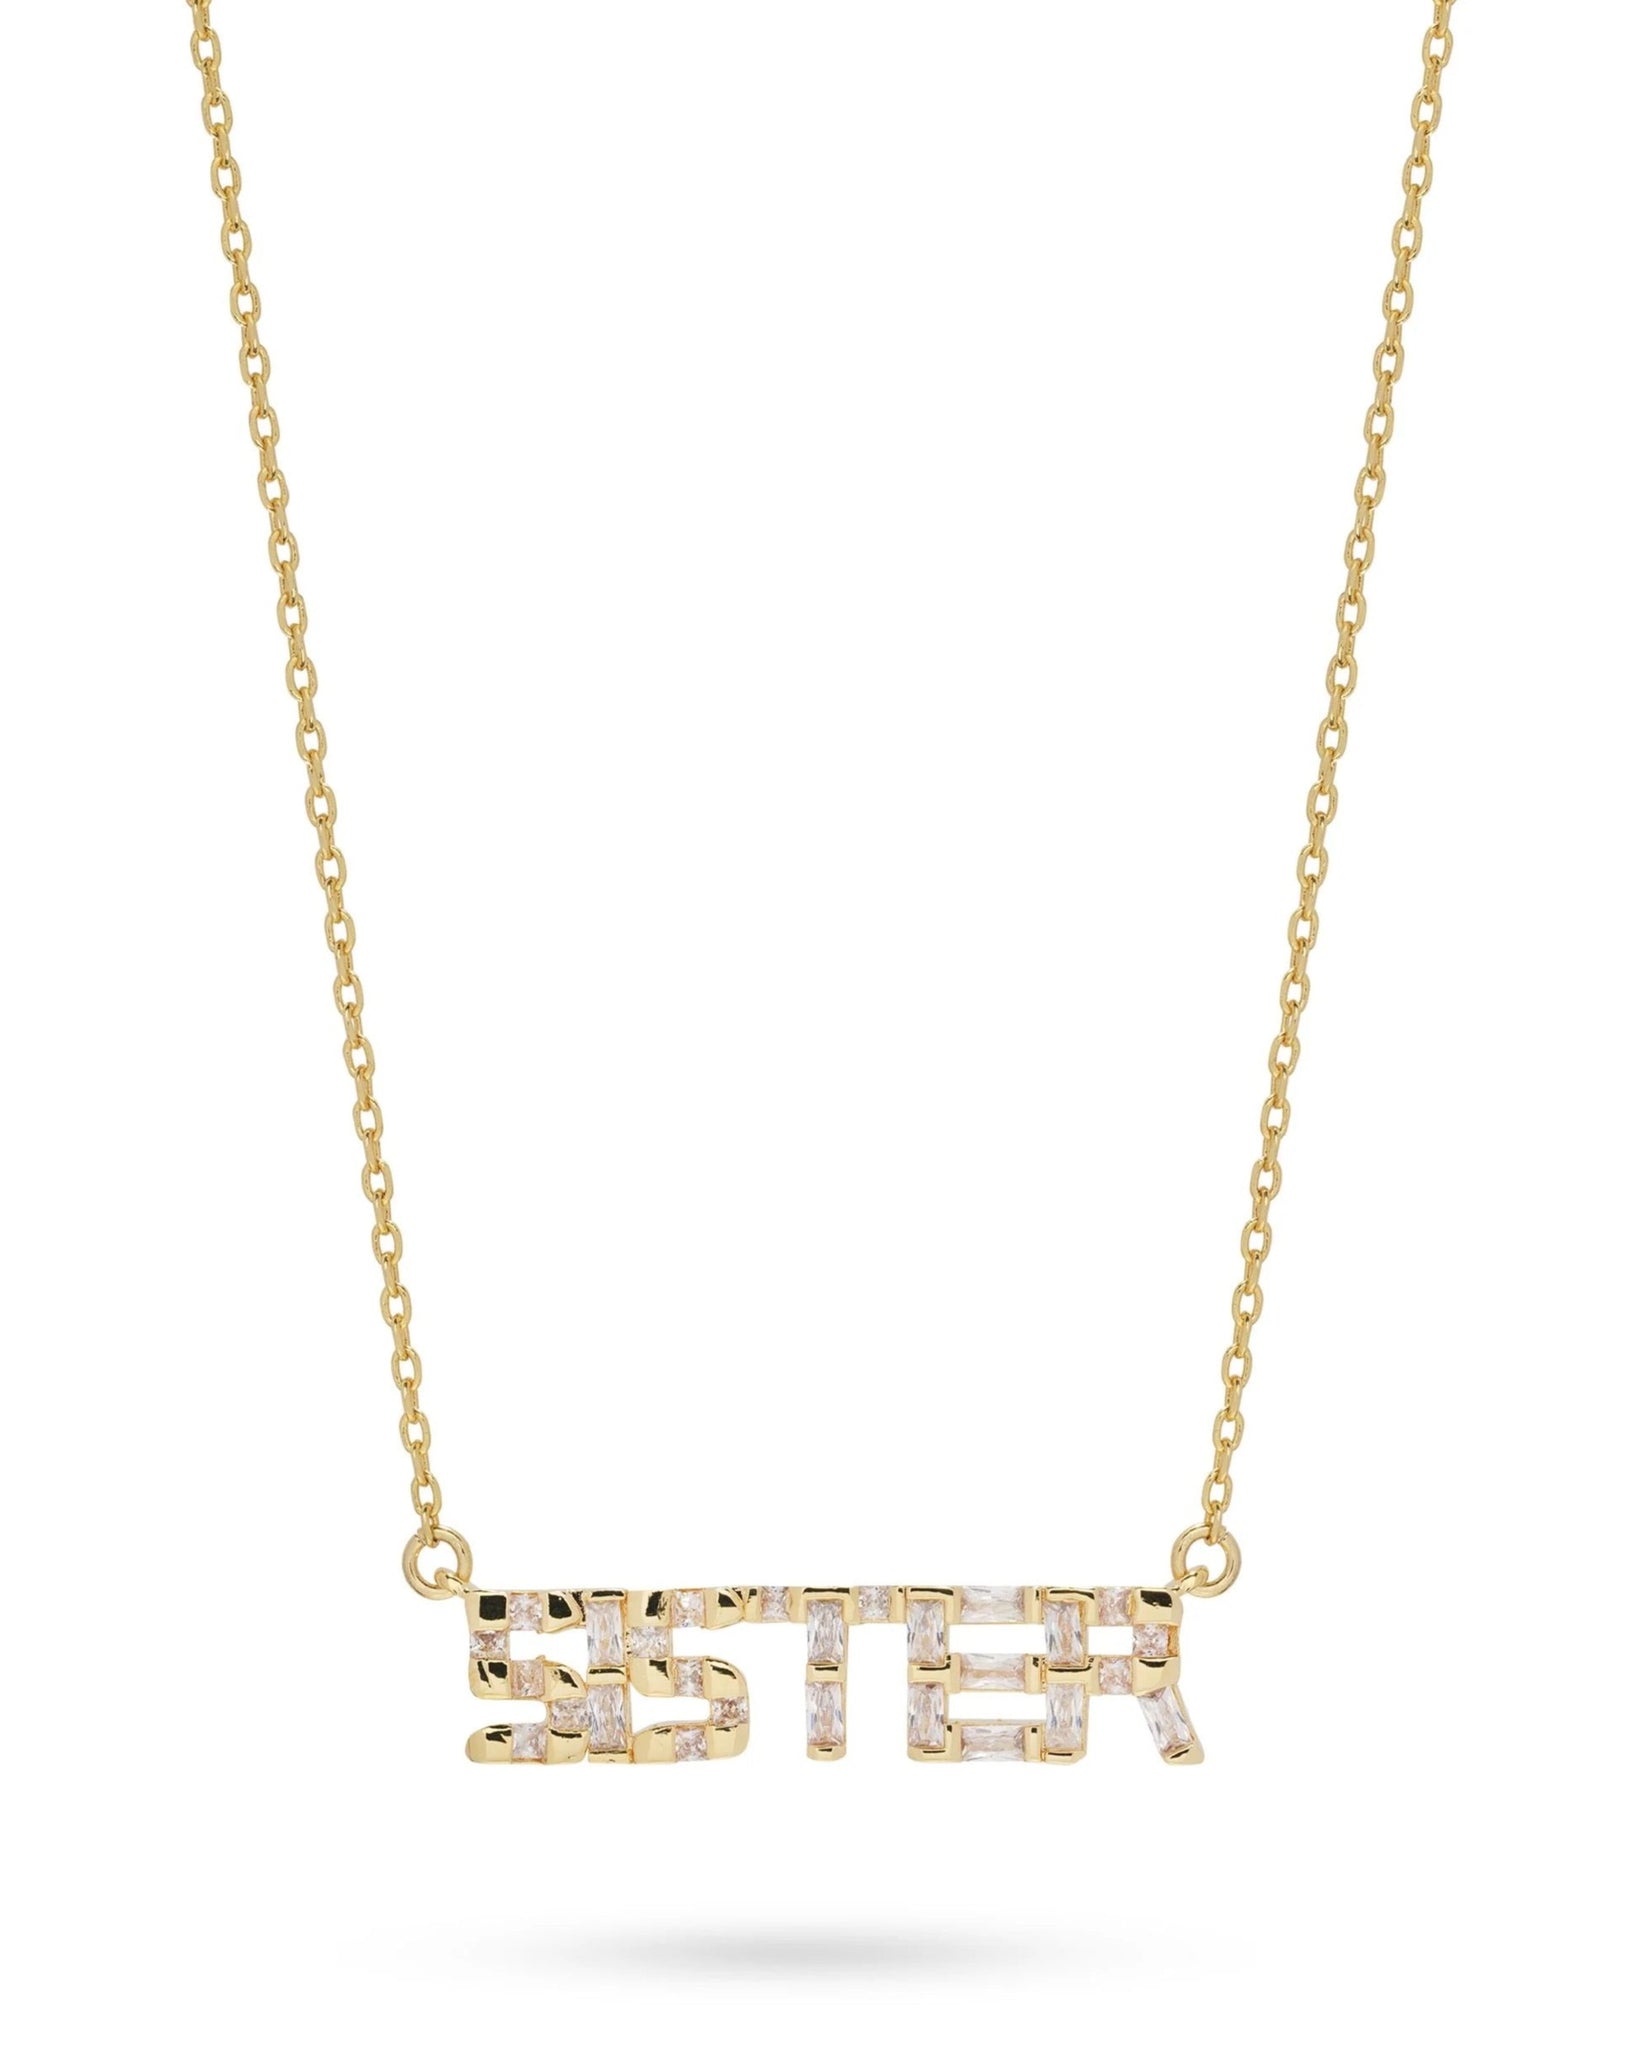 Sister necklace by Crystal Haze